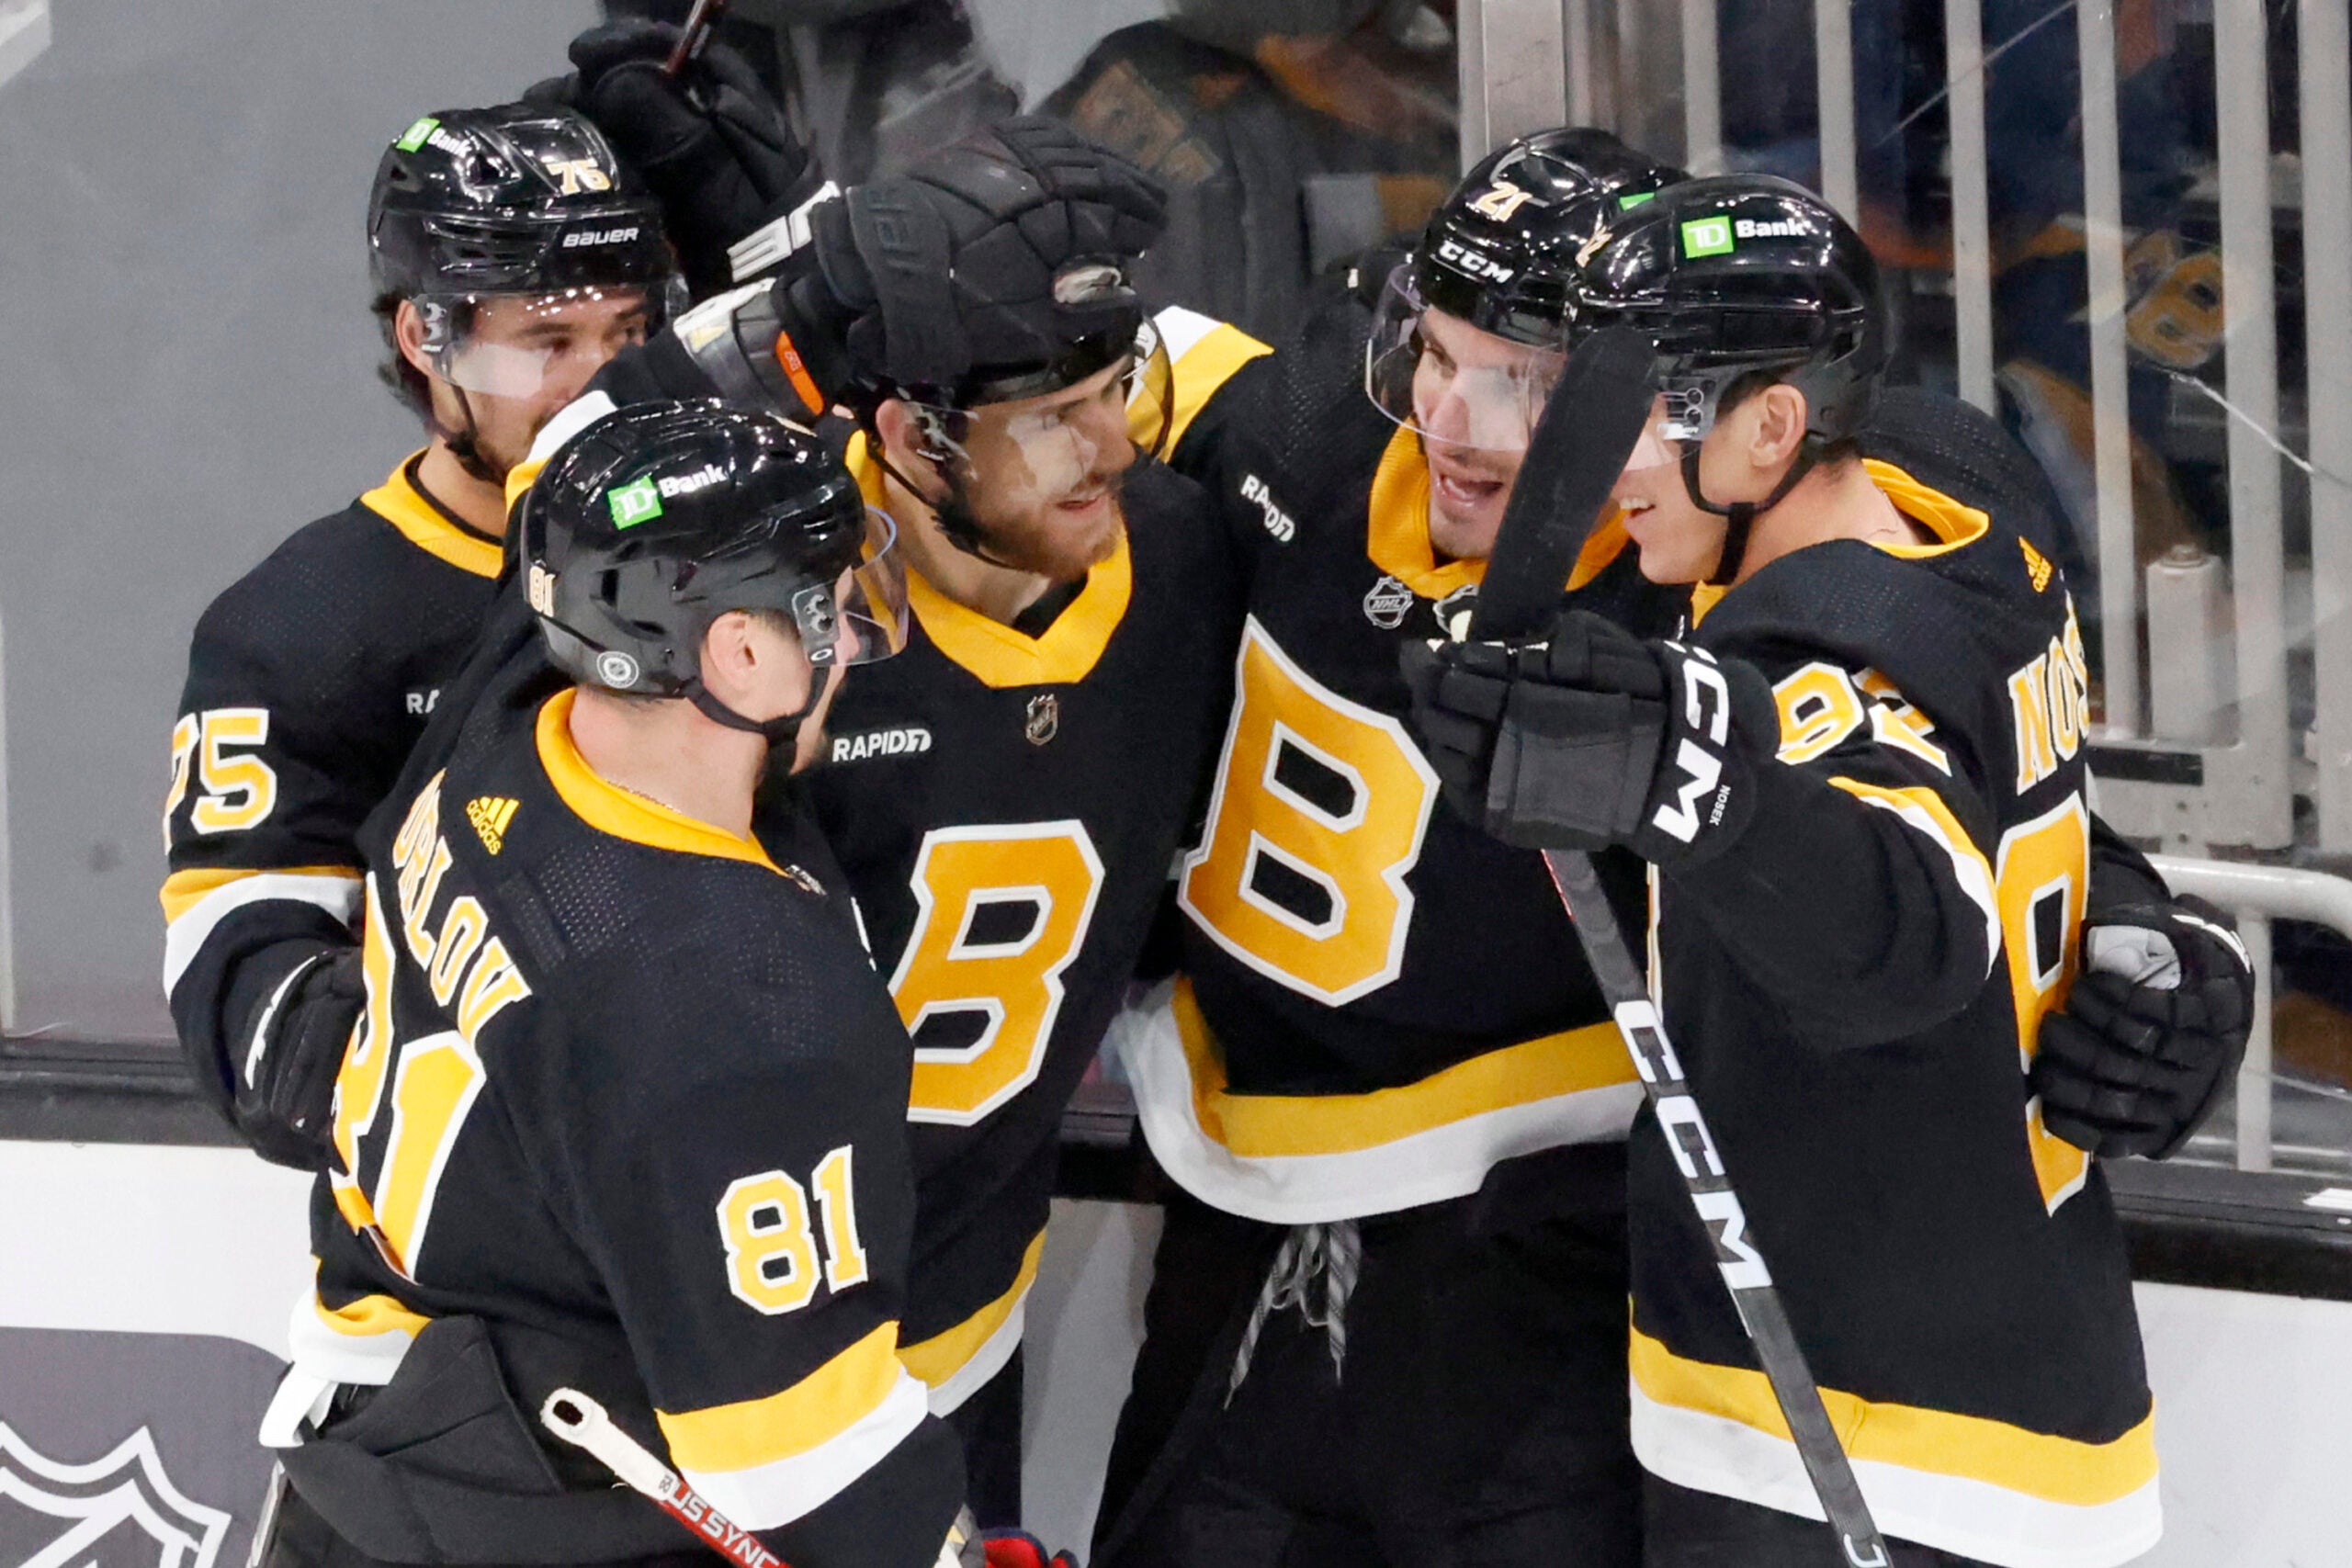 Boston Bruins players congratulate teammate Garnet Hathaway (21) after he scored the game-winning goal against the Detroit Red Wings during the third period of an NHL hockey game, Saturday, March 11, 2023, in Boston.